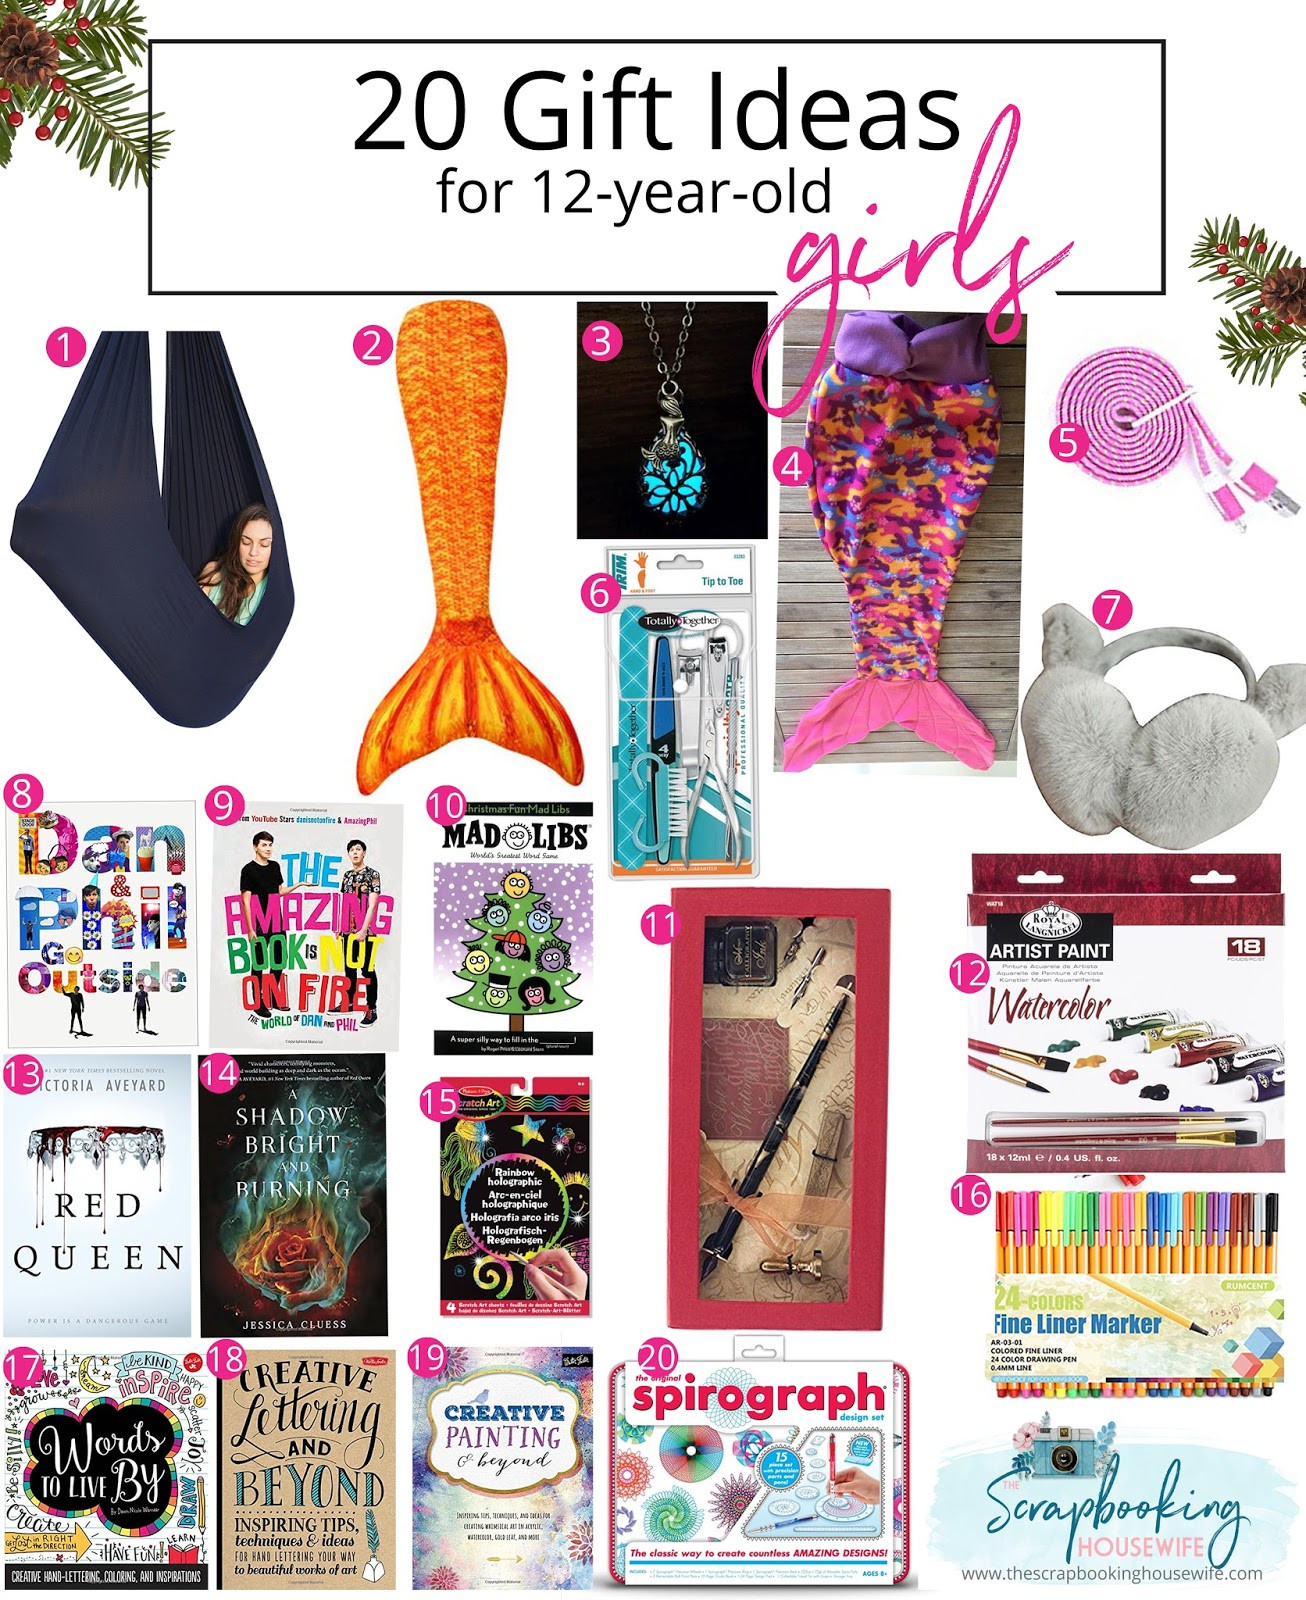 Birthday Gift Ideas For 12 Year Old Girl
 Ellabella Designs 13 GIFT IDEAS FOR TODDLERS